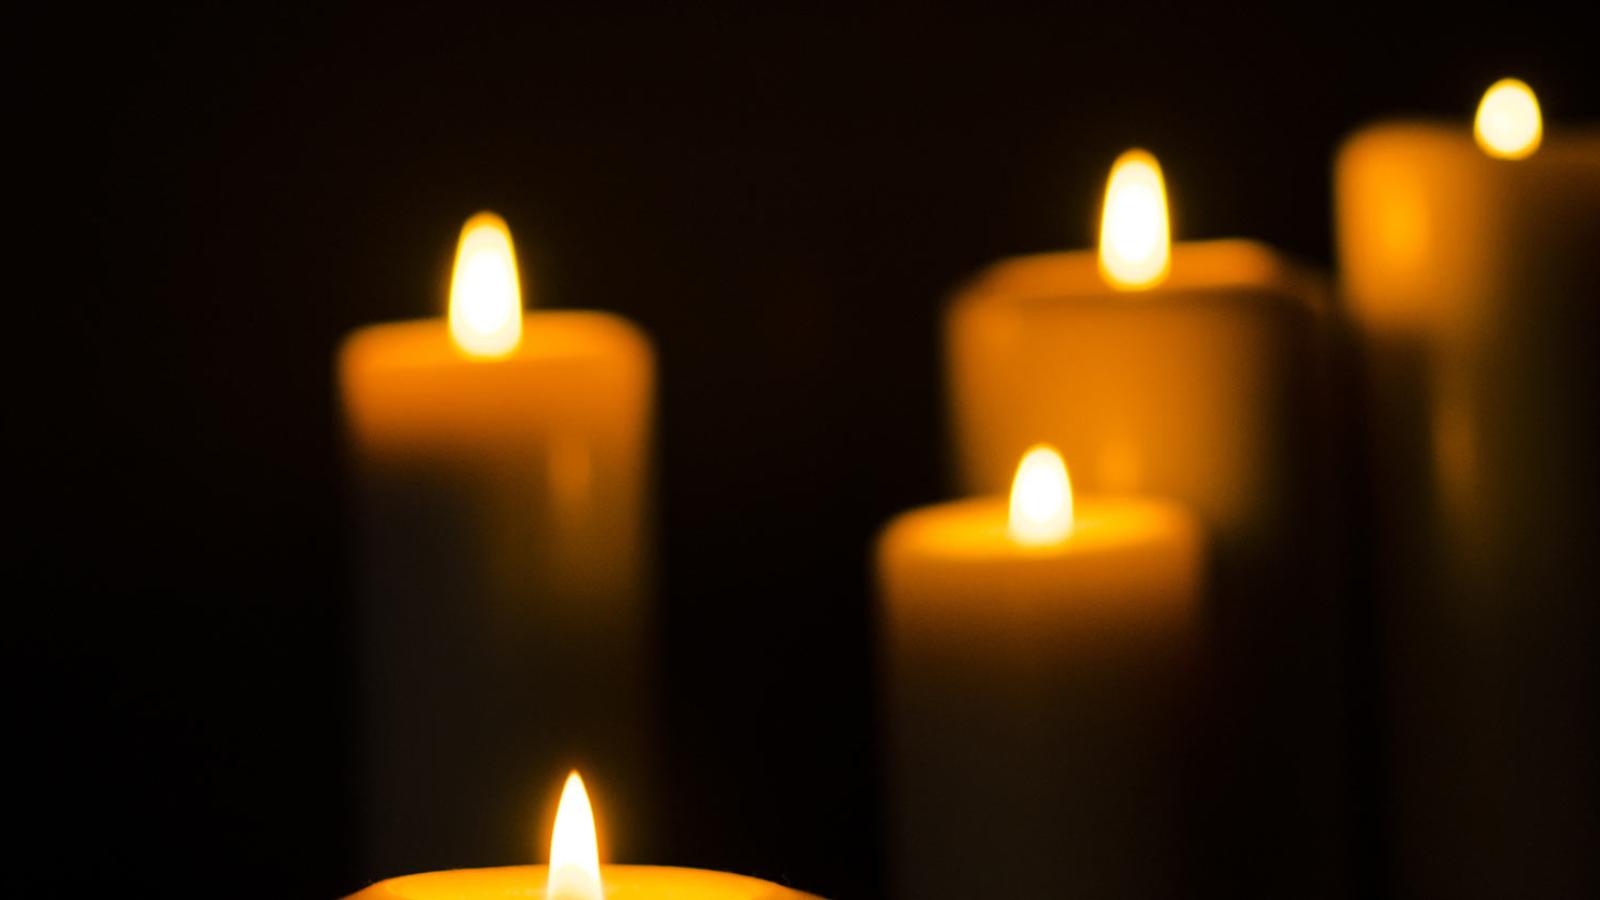 Lit candles on a black background